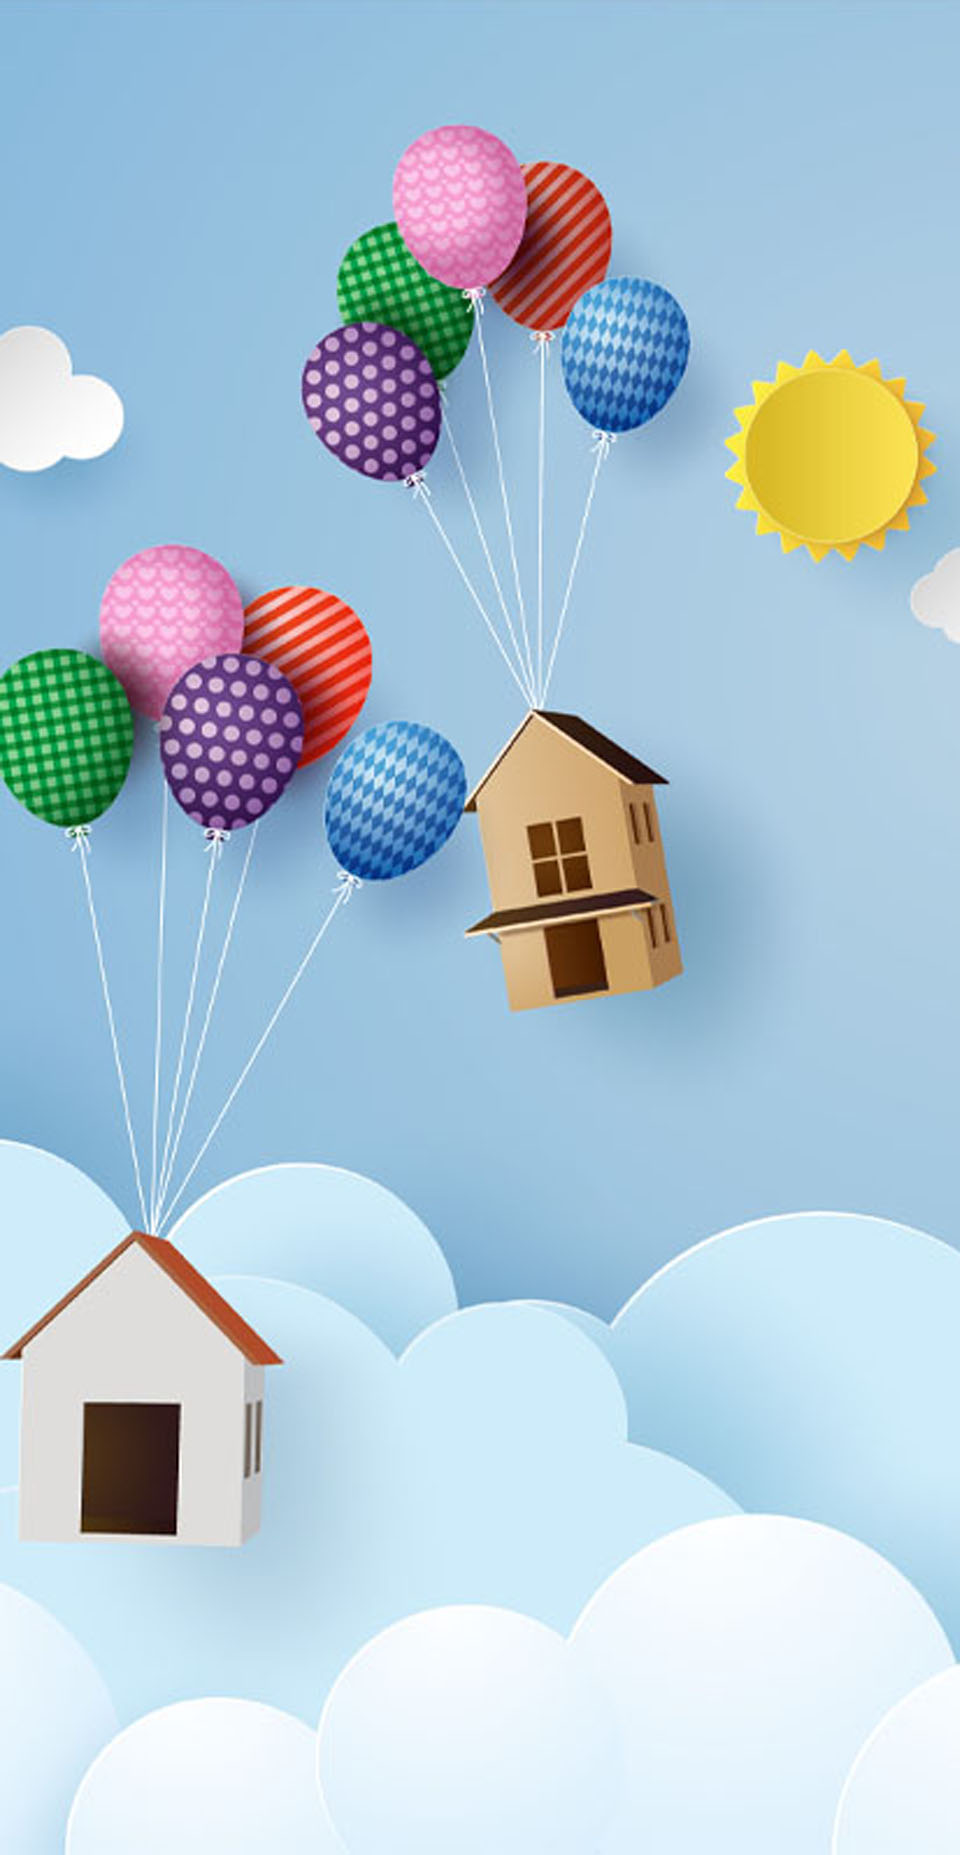 Image showing a model of house floating in the sky with balloons attached to them